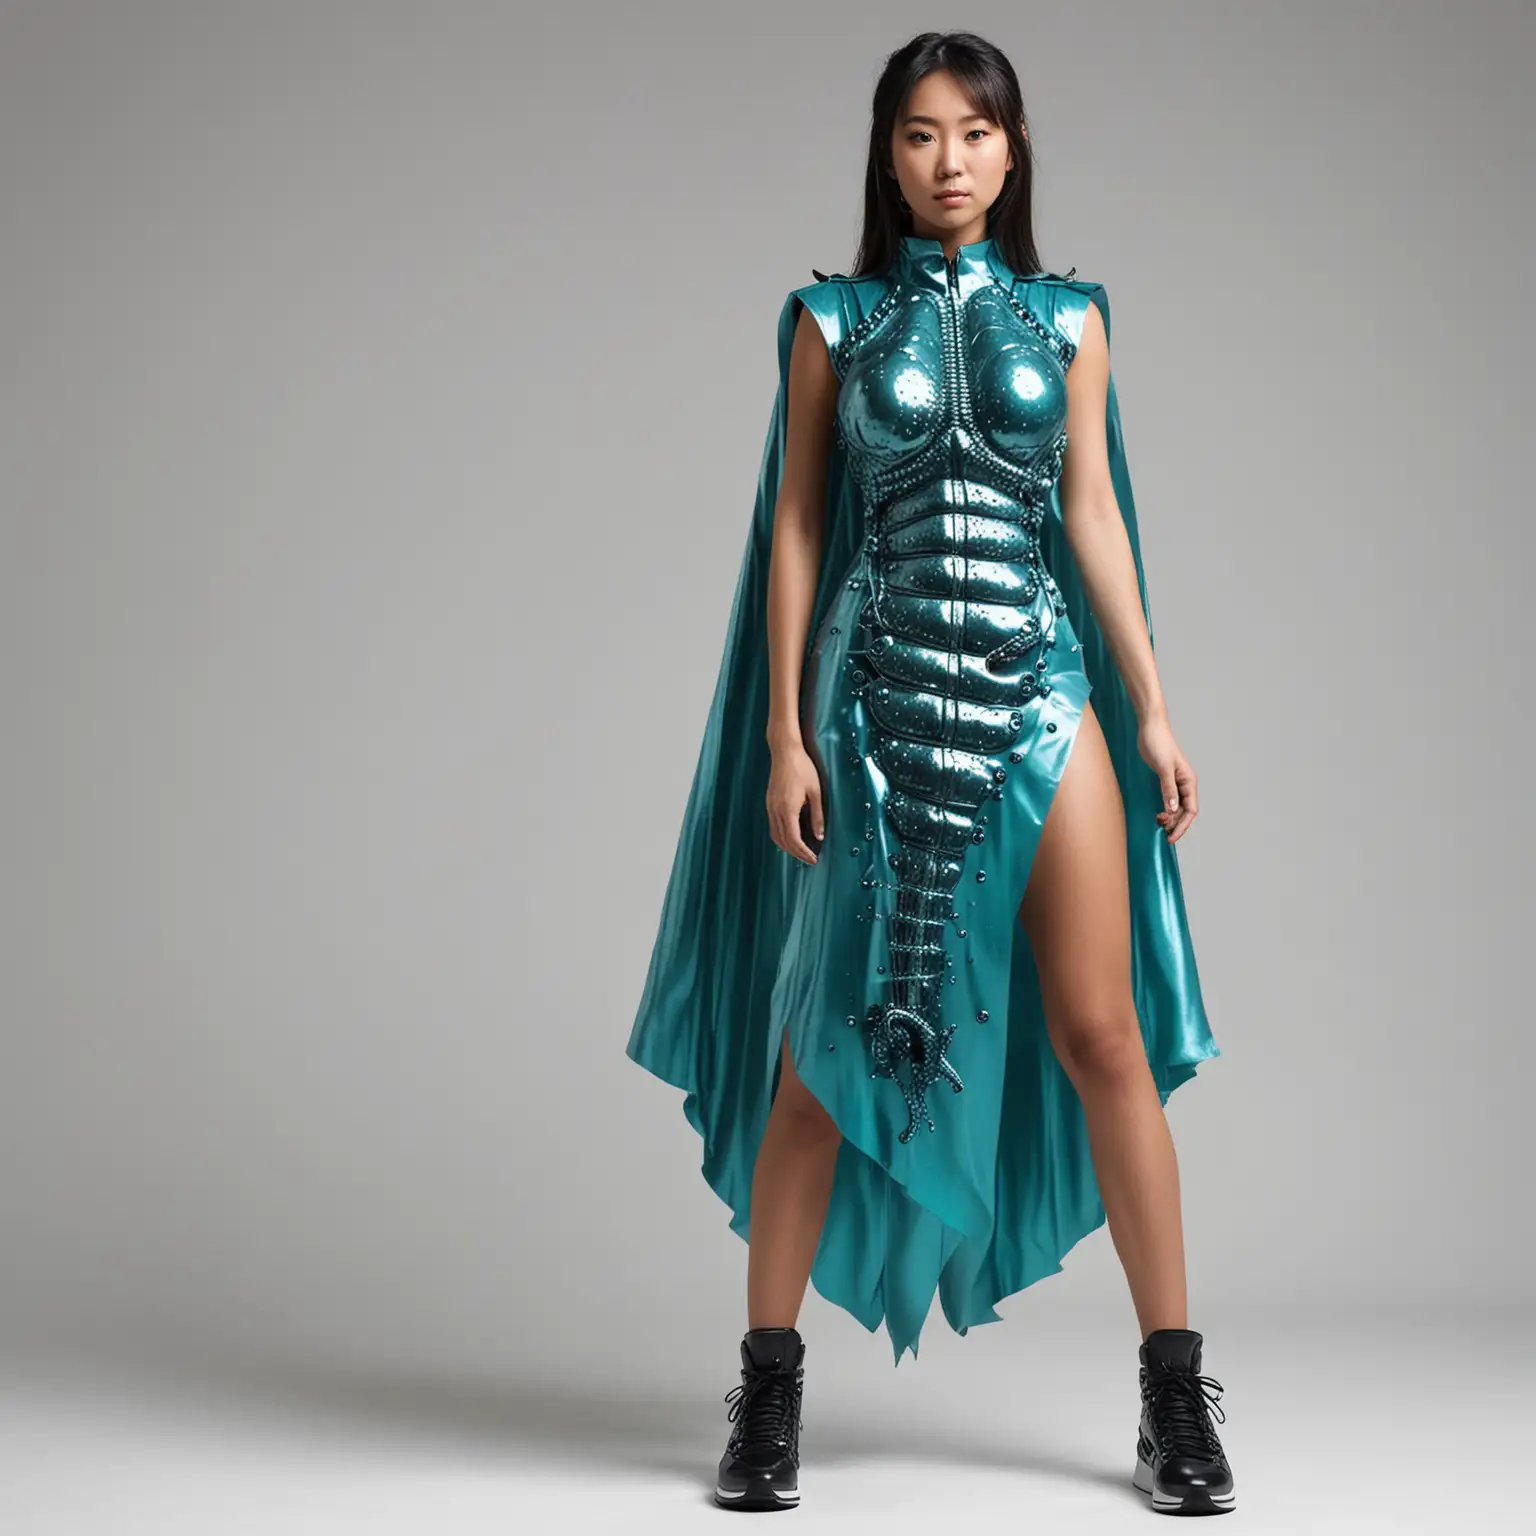 Strong muscular beautiful Japanese woman in sleeveless teal double thigh slit dress made of large metallic plastic seahorse pieces, teal cape, black sneakers, white background